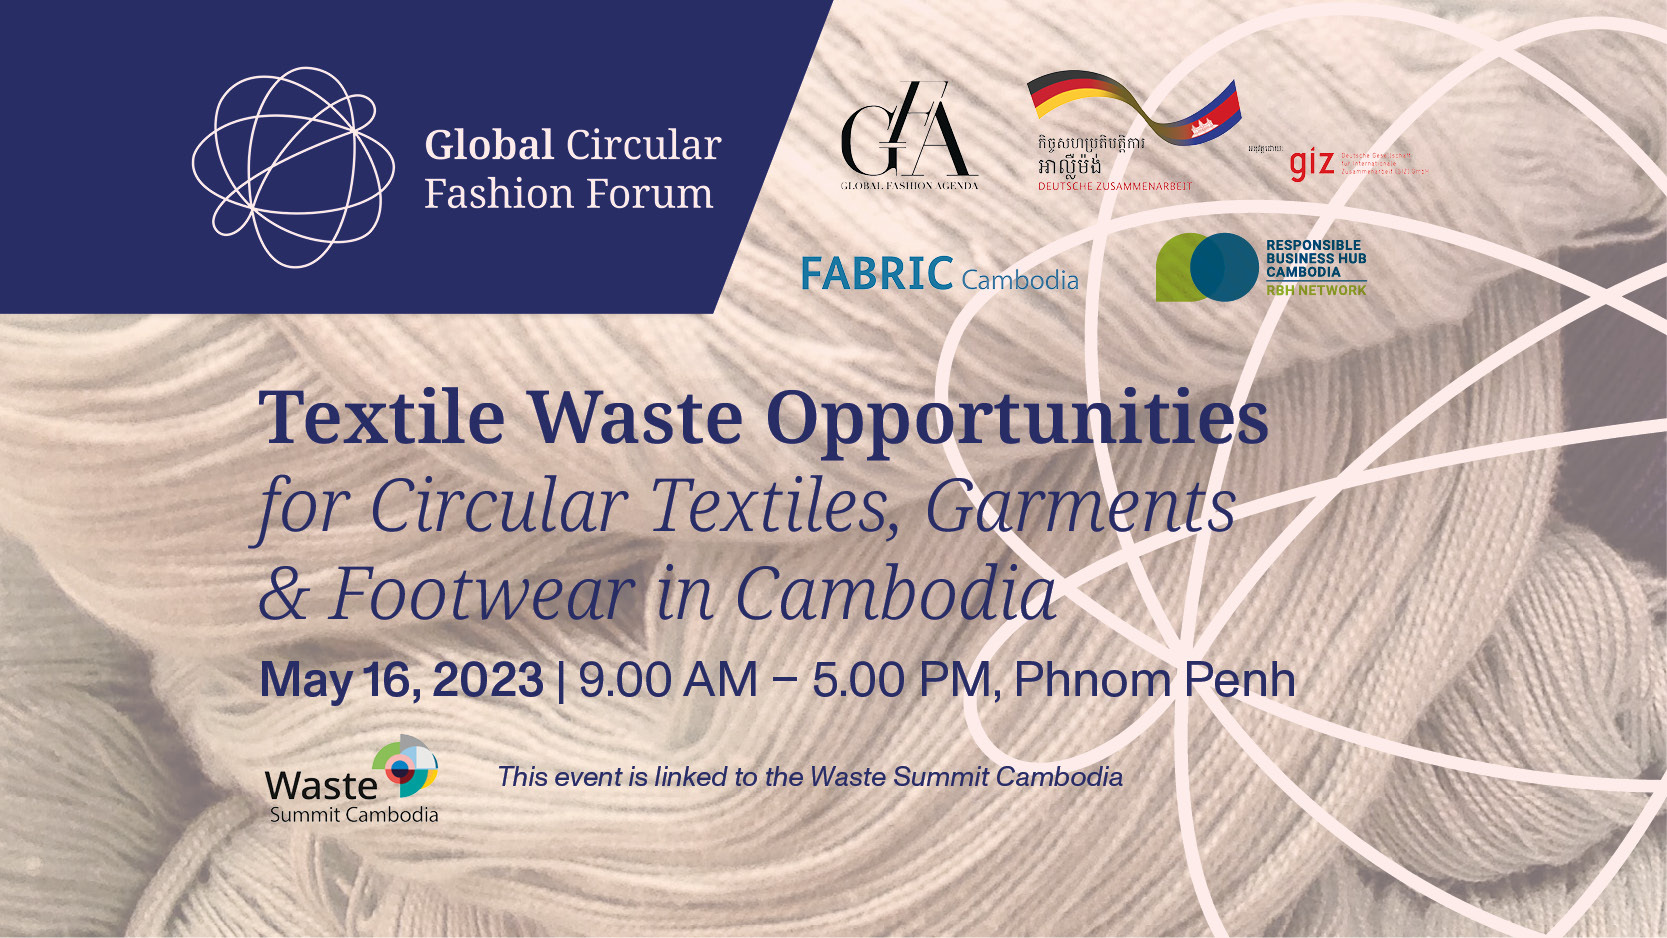 Fashion for Good: Full Circle Textiles Project aims at textile recycling